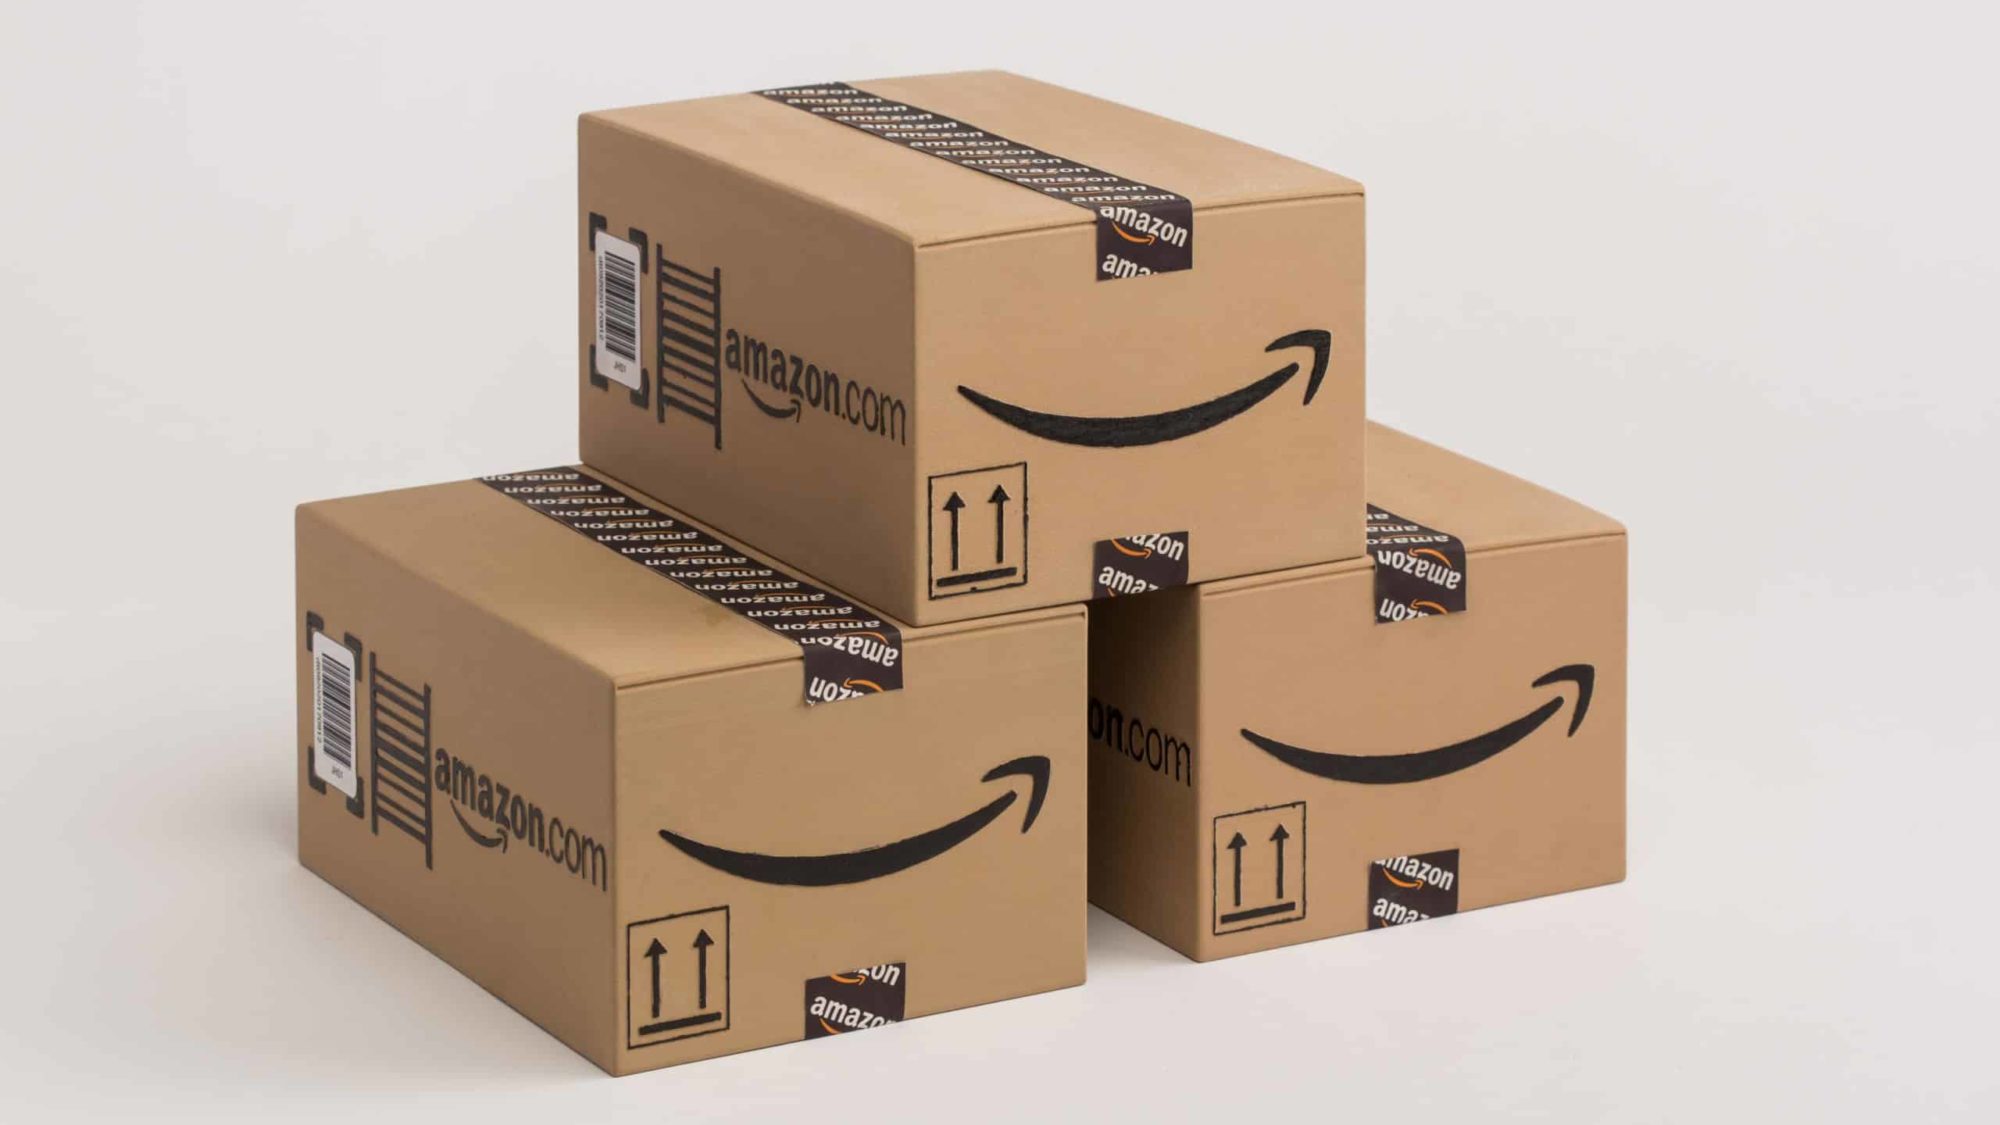 Export sales from UK-based businesses on Amazon Marketplace to surpass £1.8 billion